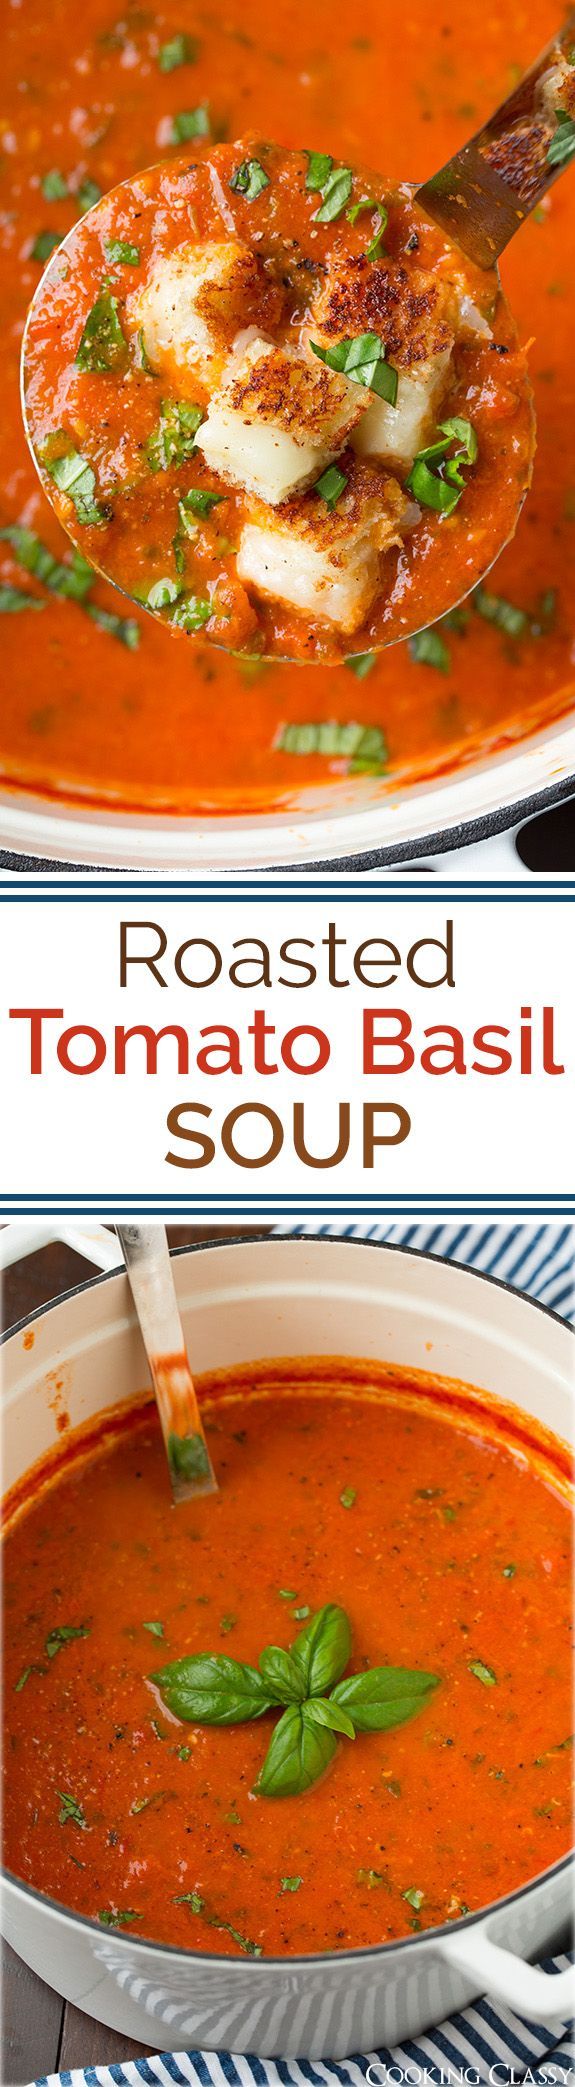 Roasted Tomato Basil Soup (with optional grilled cheese croutons) – this soup is incredibly good! So much fresh flavor and